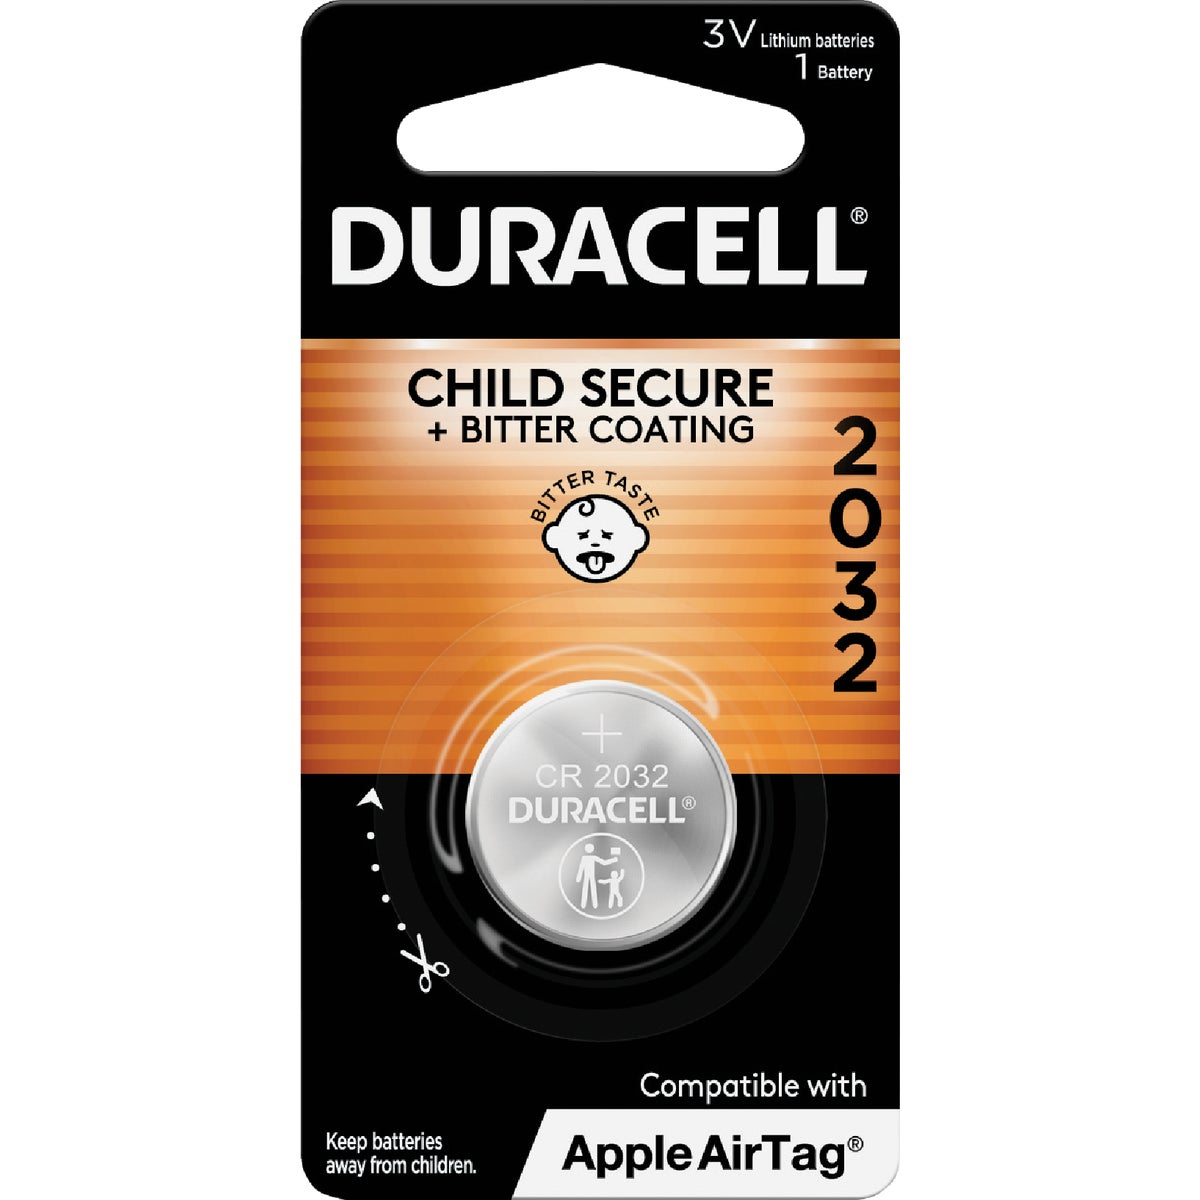 Duracell 2032 Lithium Coin Cell Battery